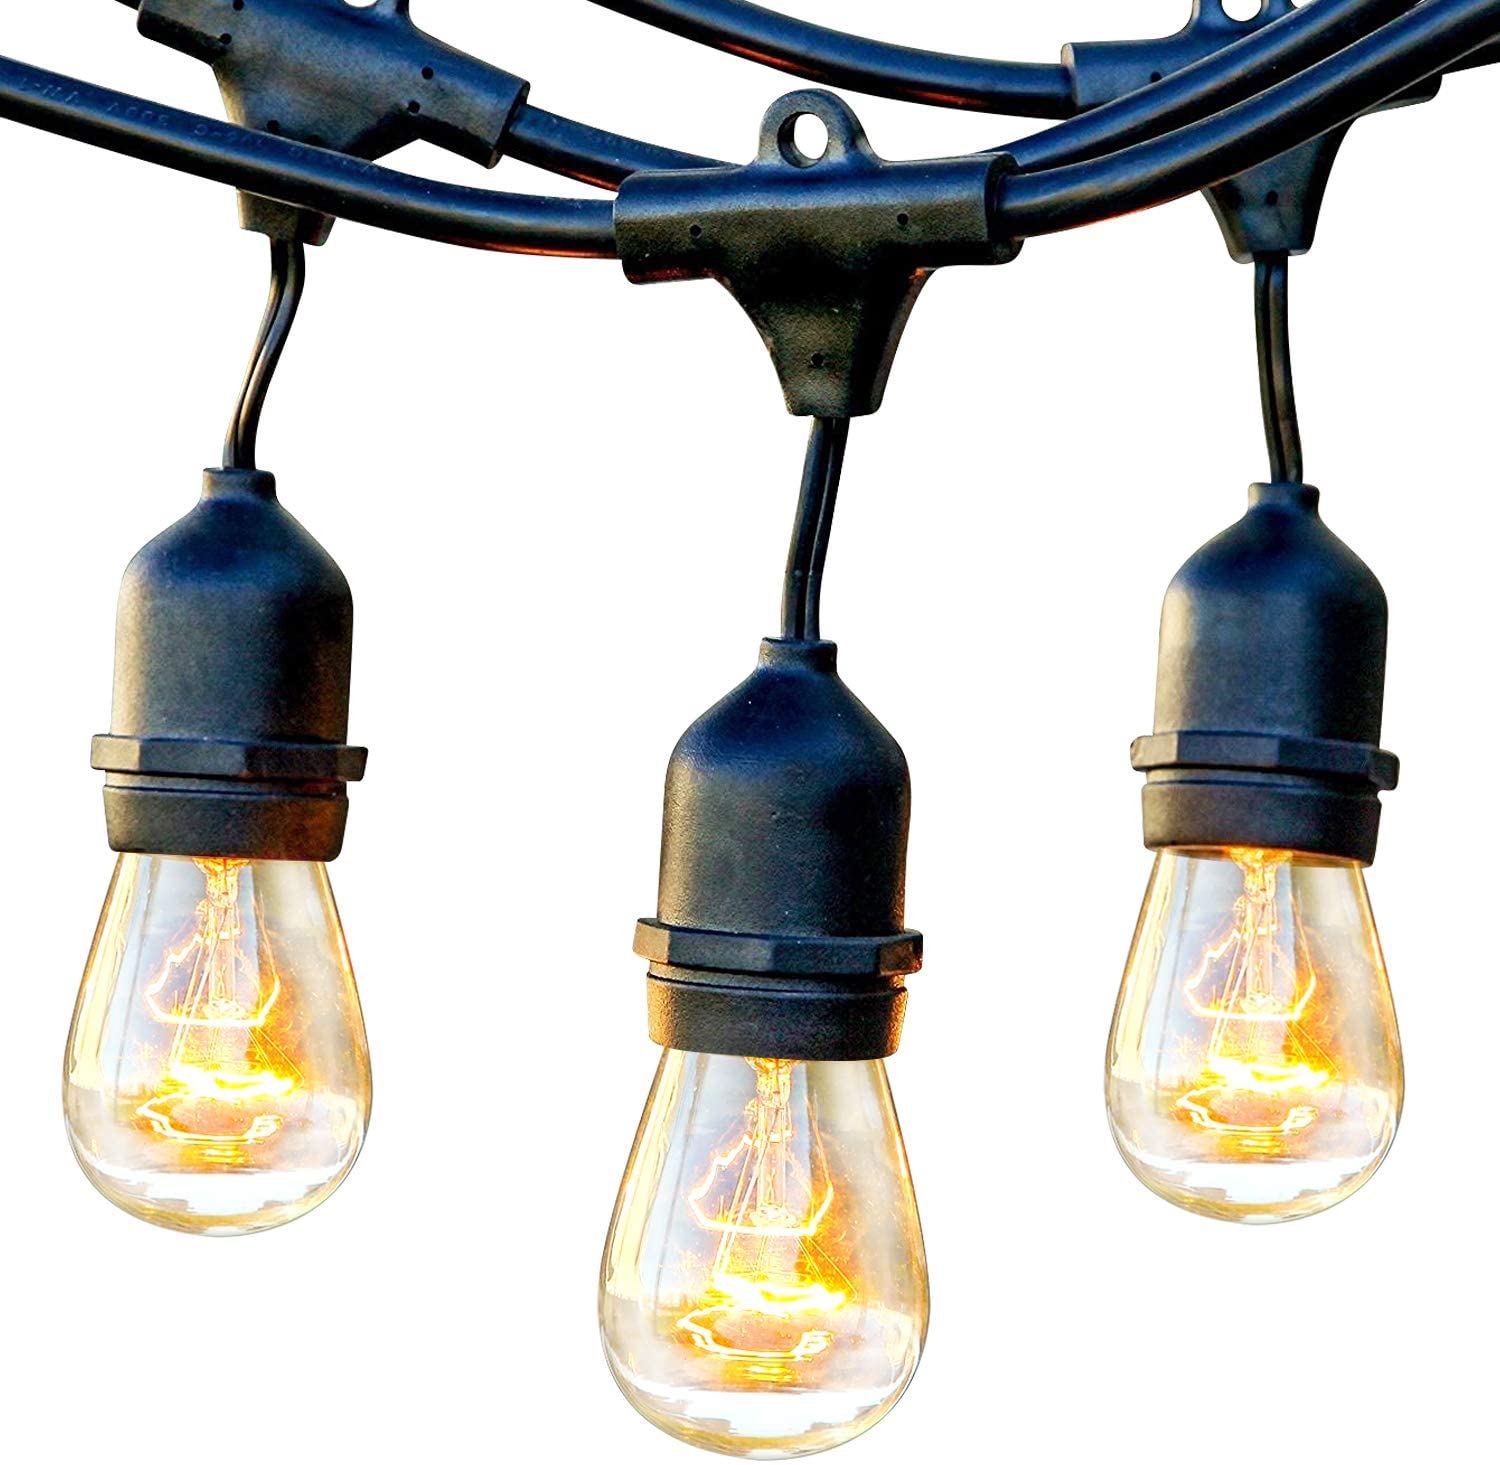 Brightech Ambience Pro Electric Outdoor Edison String Lights, 48-Feet